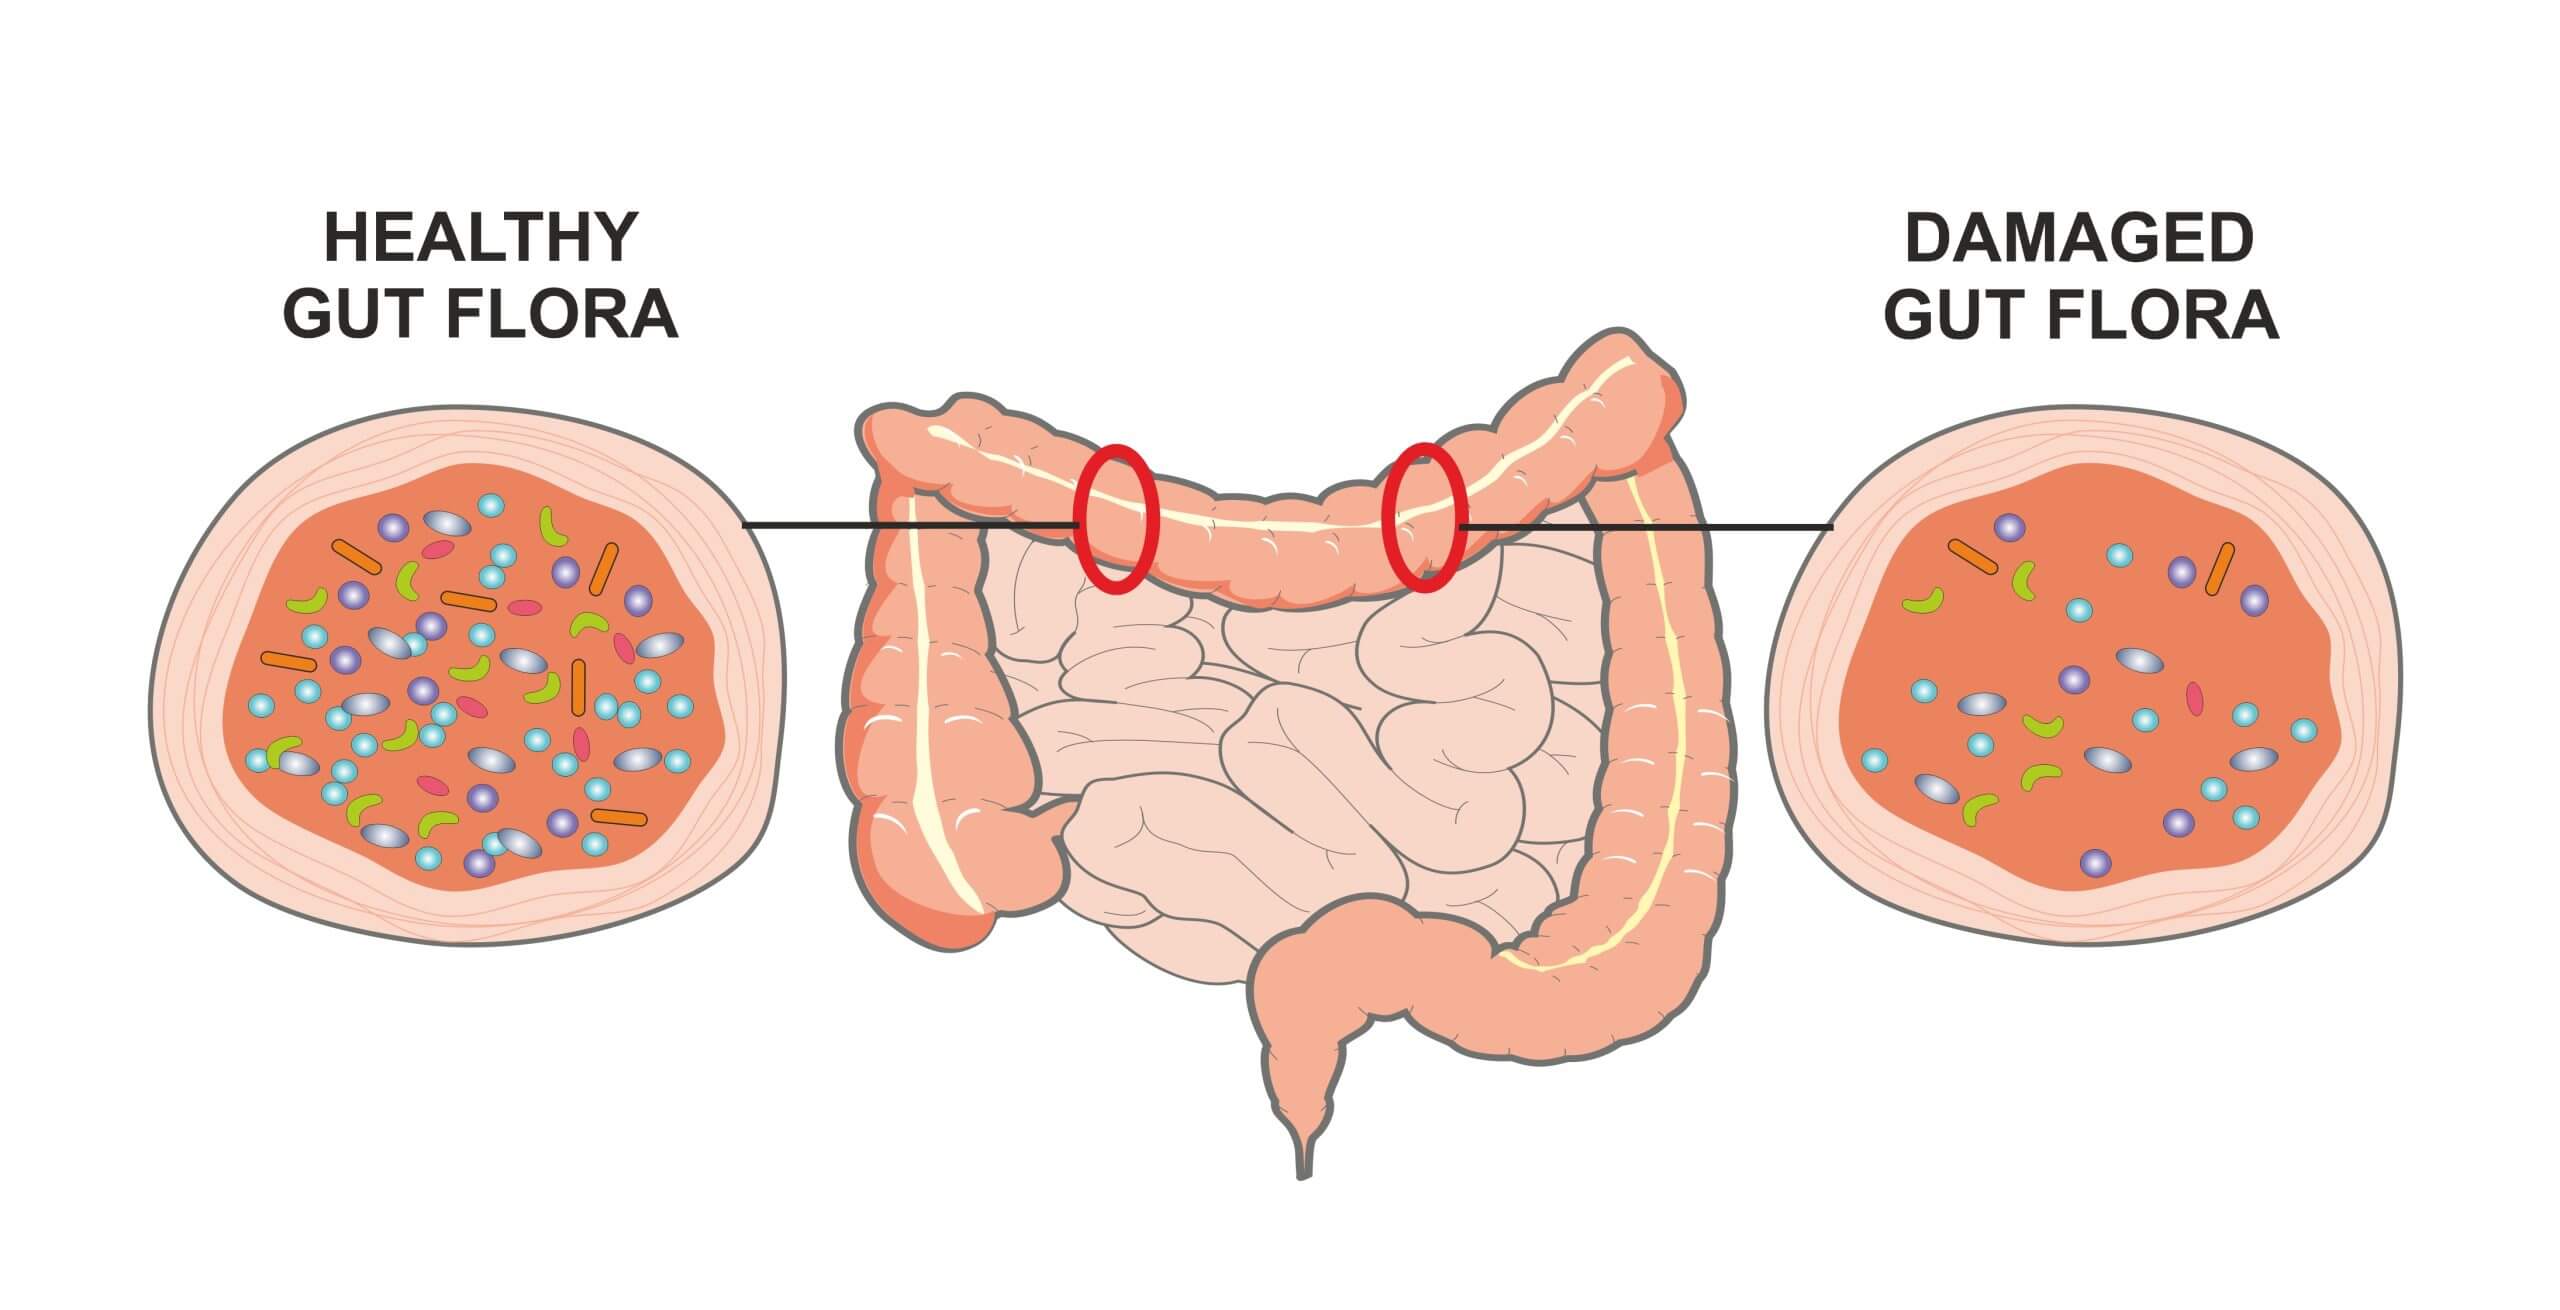 Image of intestines with cross sections comparing healthy gut flora with unhealthy gut flora.